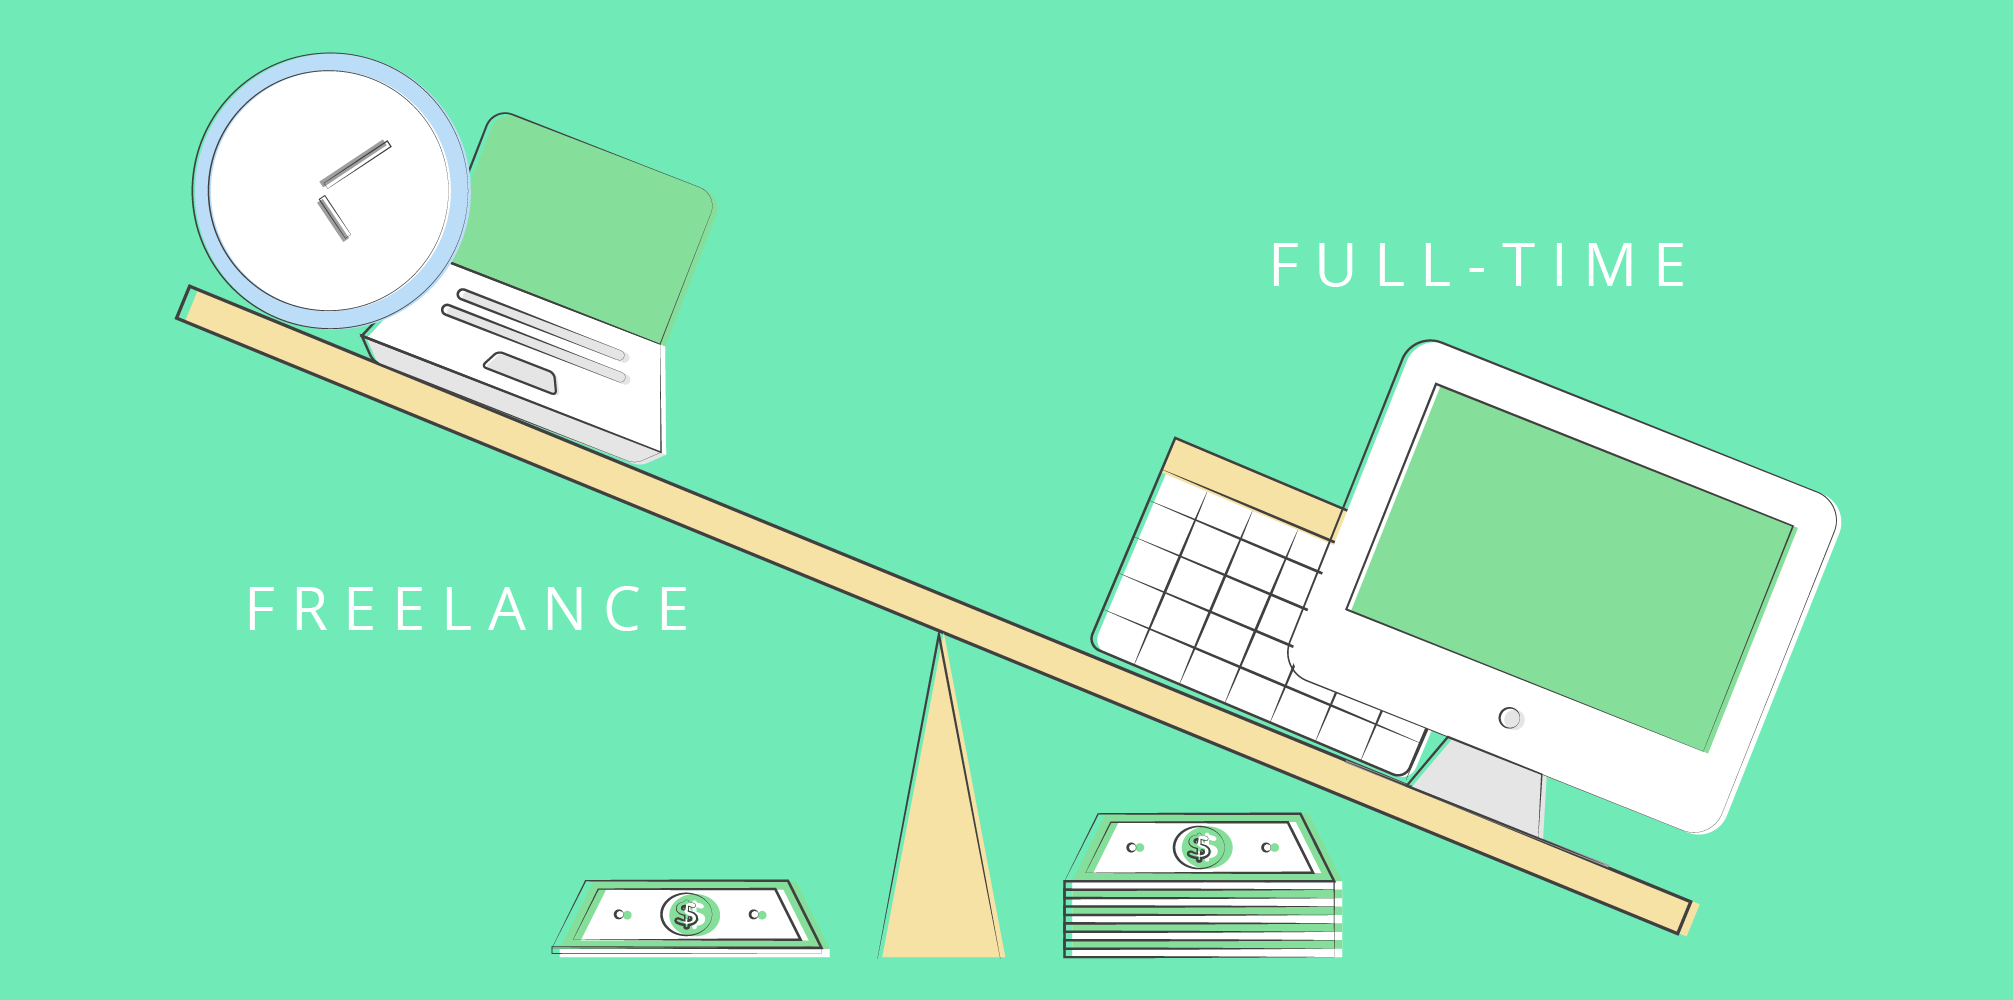 Illustration showing the cost different between hiring freelancers vs. employees.